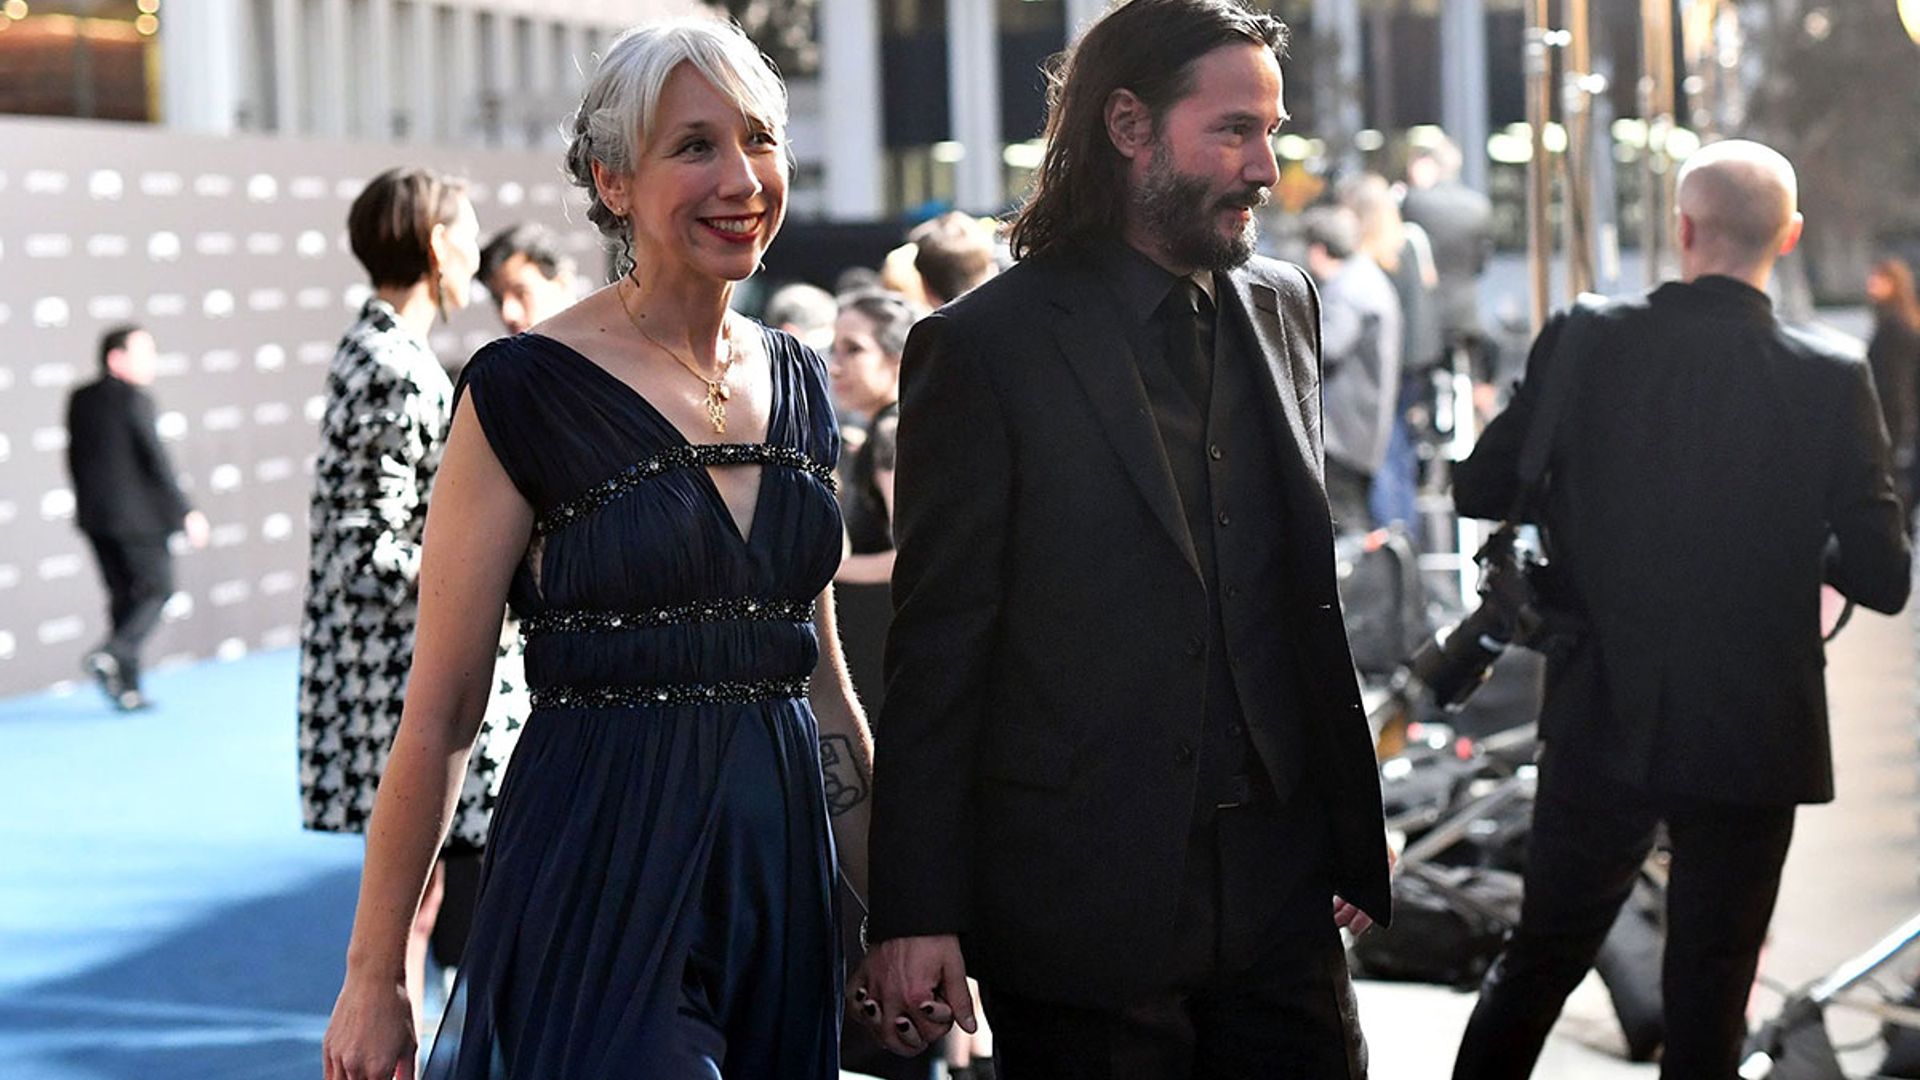 Keanu Reeves sparks romance rumours as he holds hands with Alexandra Grant on the red carpet